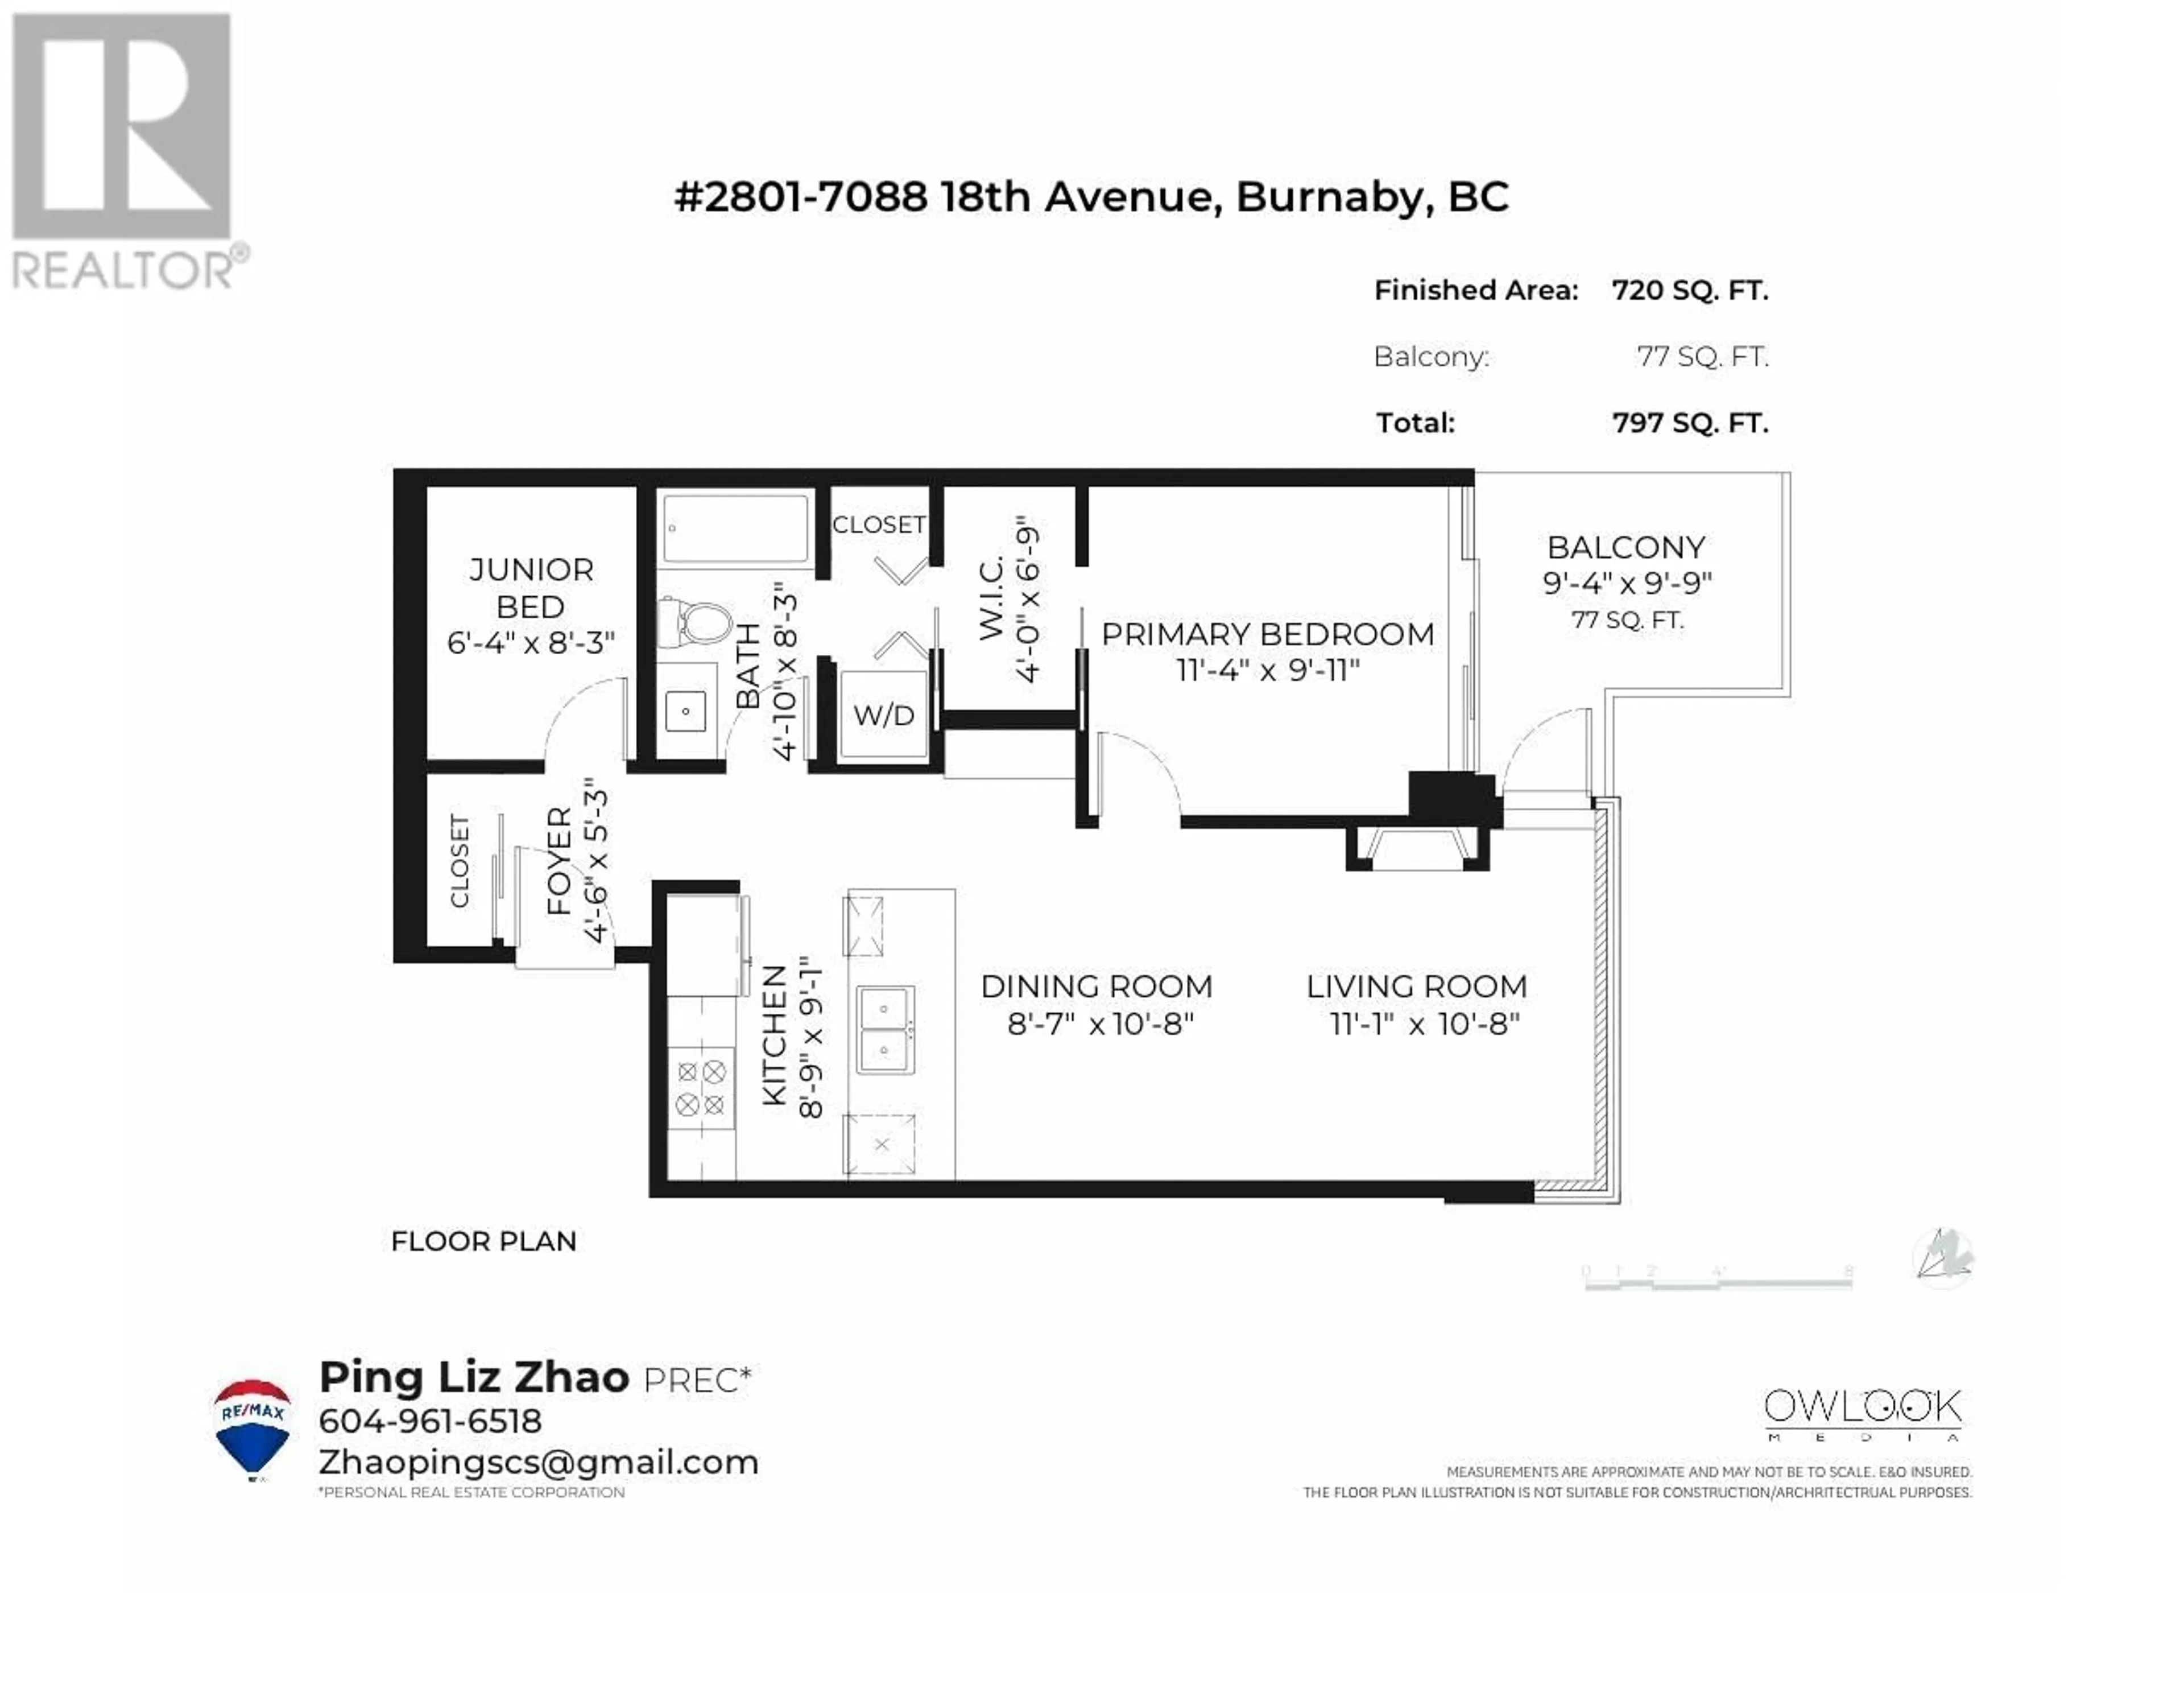 Floor plan for 2801 7088 18TH AVENUE, Burnaby British Columbia V3N0A2